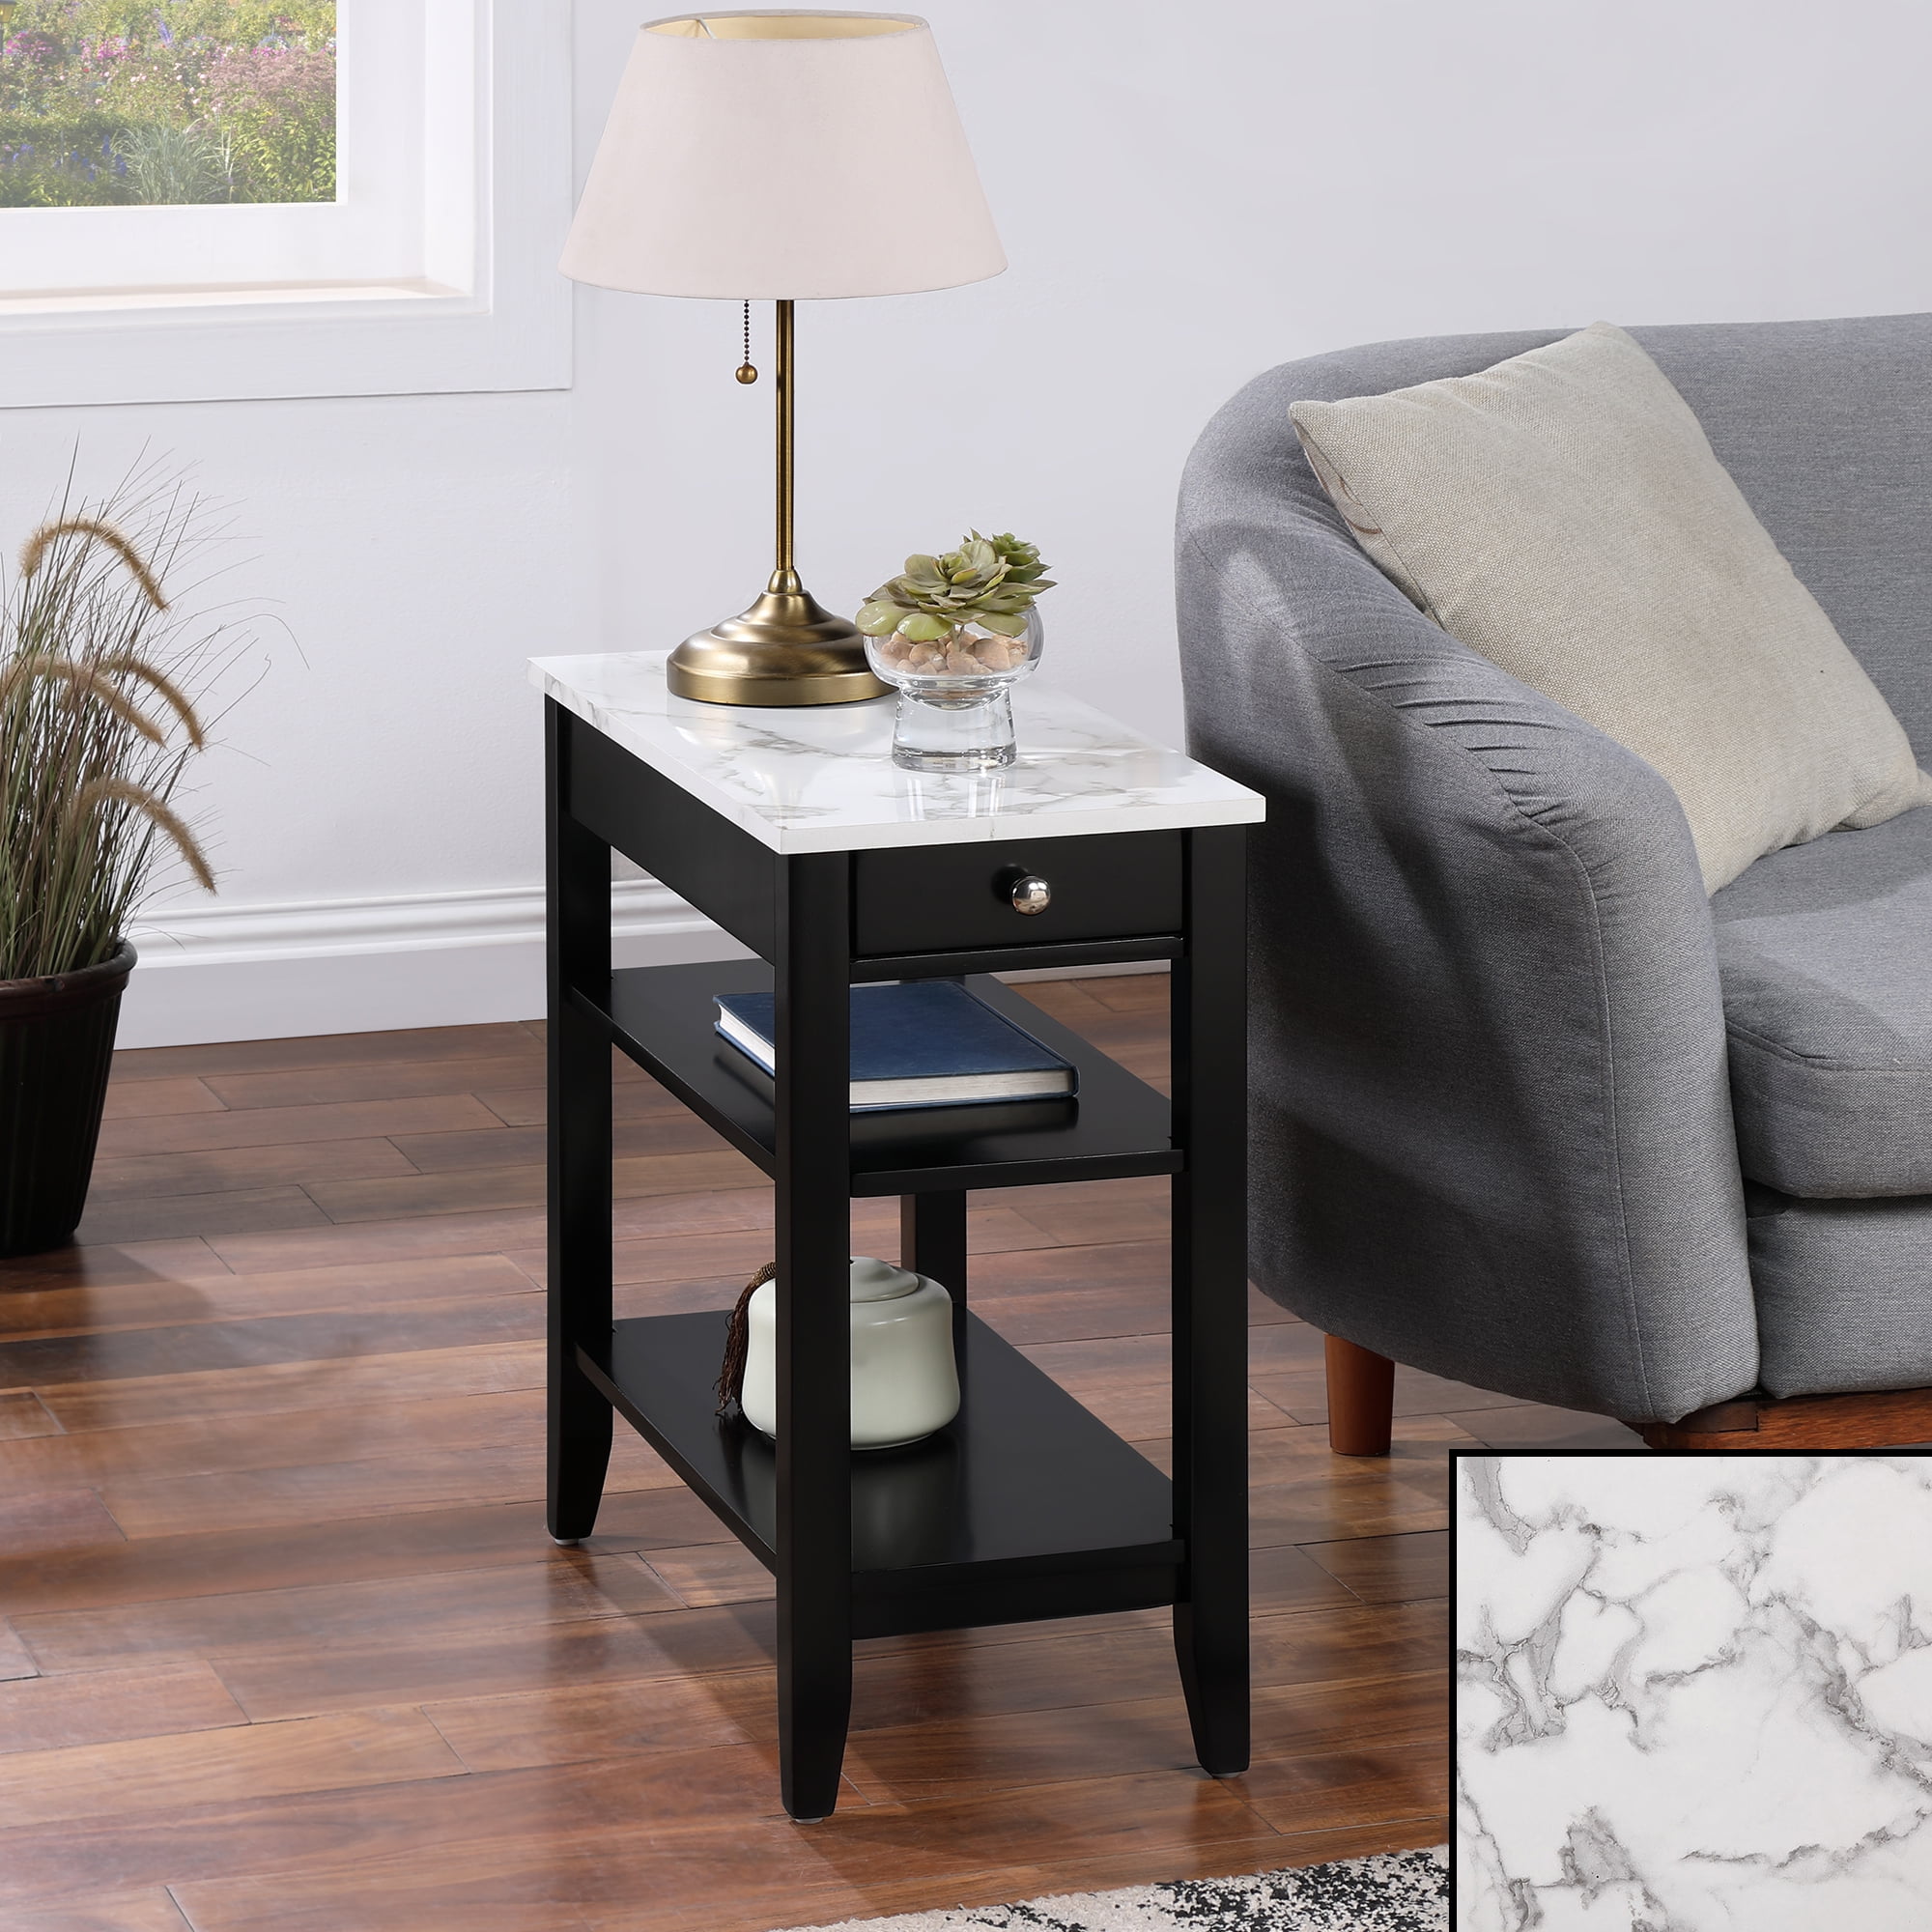 23.50 x 11.25 x 24 in. American Heritage 1 Drawer Chairside End Table with Shelves - Faux Marble & Black -  Convenience Concepts, HI2835973